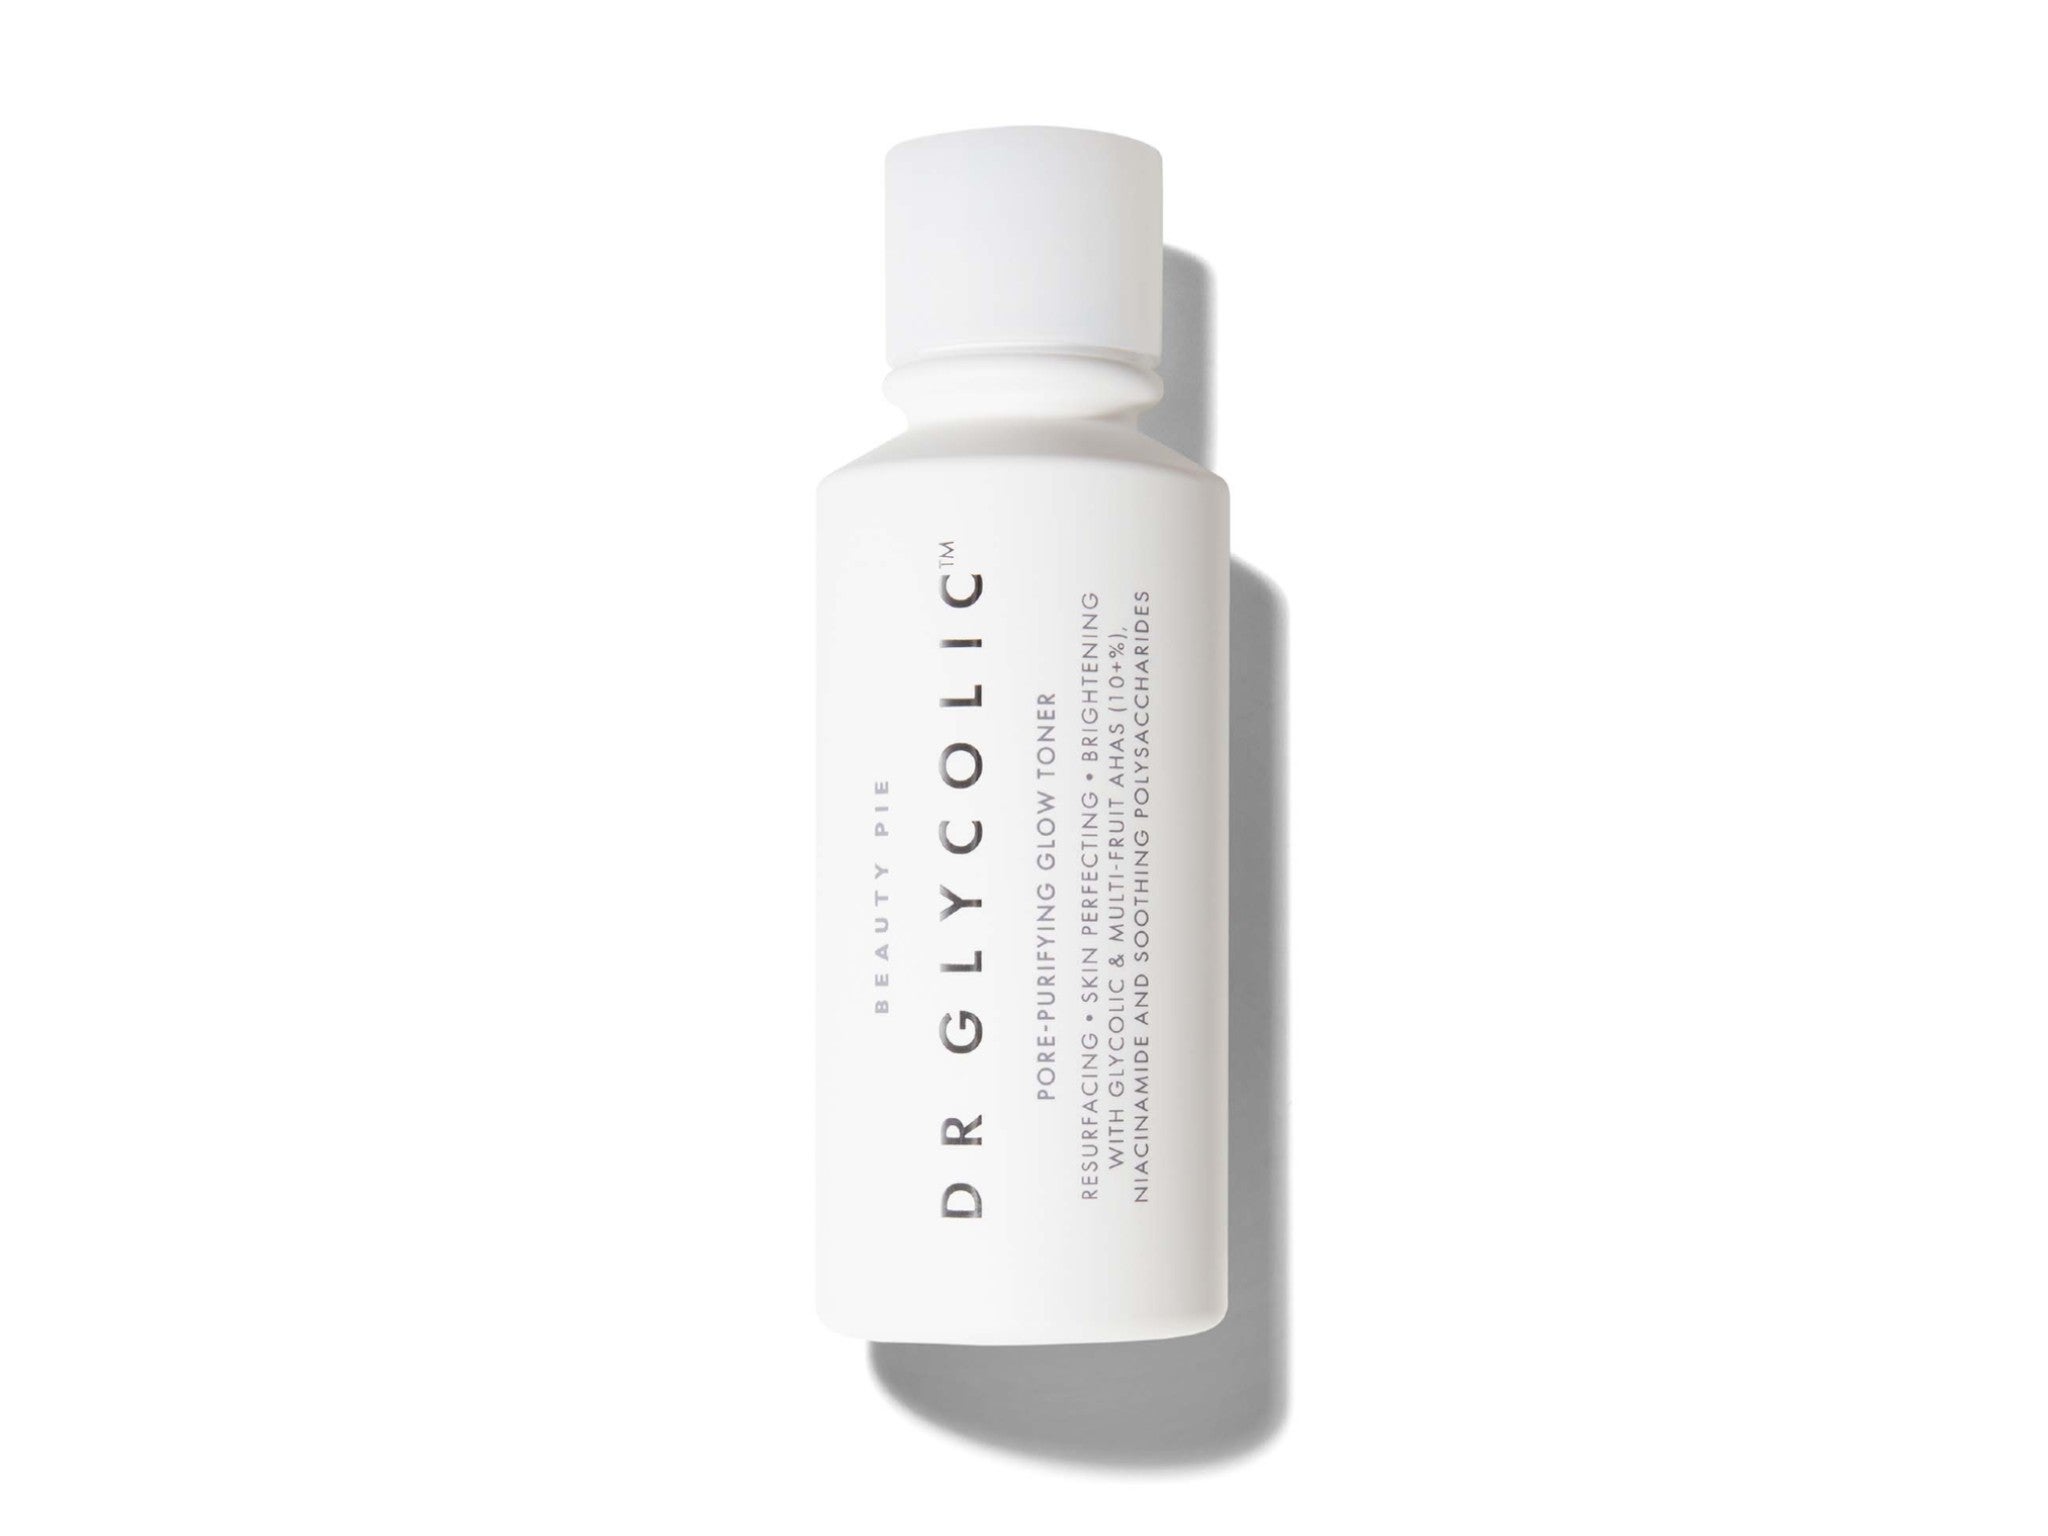 Beauty Pie Dr Glycolic pore-purifying glow toner indybest.jpeg